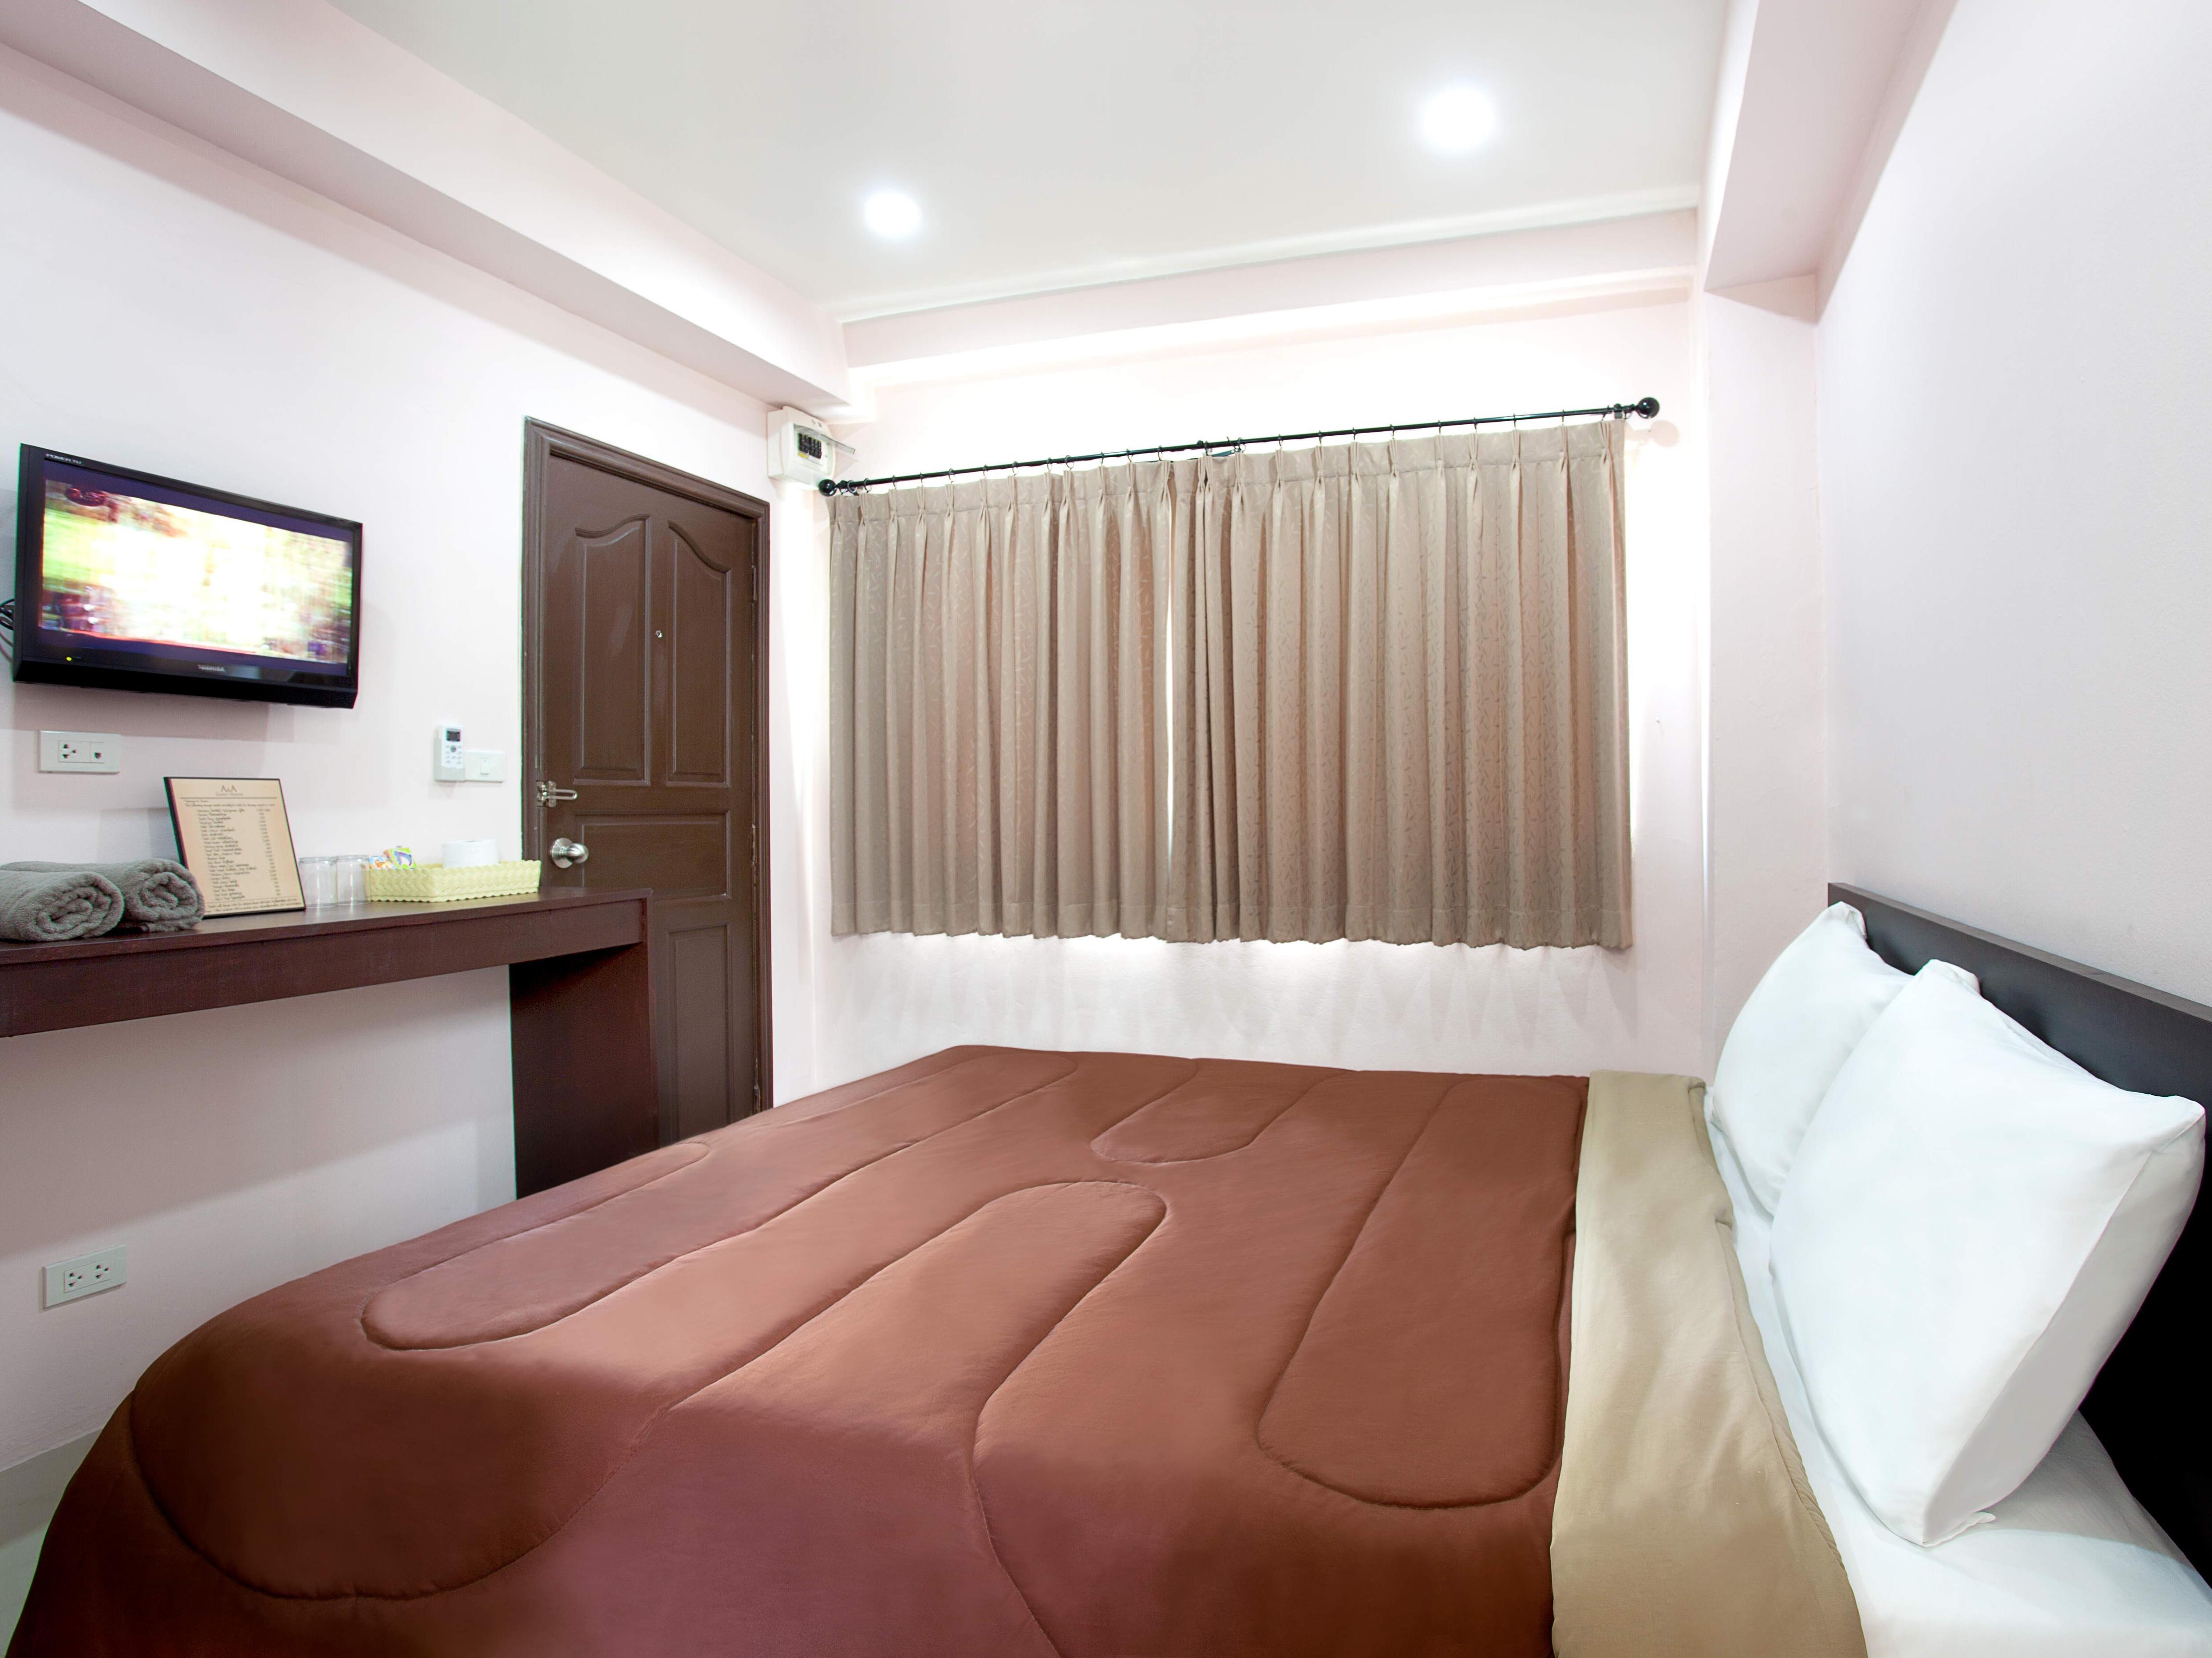 A&A Guest House Thailand FAQ 2016, What facilities are there in A&A Guest House Thailand 2016, What Languages Spoken are Supported in A&A Guest House Thailand 2016, Which payment cards are accepted in A&A Guest House Thailand , Thailand A&A Guest House room facilities and services Q&A 2016, Thailand A&A Guest House online booking services 2016, Thailand A&A Guest House address 2016, Thailand A&A Guest House telephone number 2016,Thailand A&A Guest House map 2016, Thailand A&A Guest House traffic guide 2016, how to go Thailand A&A Guest House, Thailand A&A Guest House booking online 2016, Thailand A&A Guest House room types 2016.